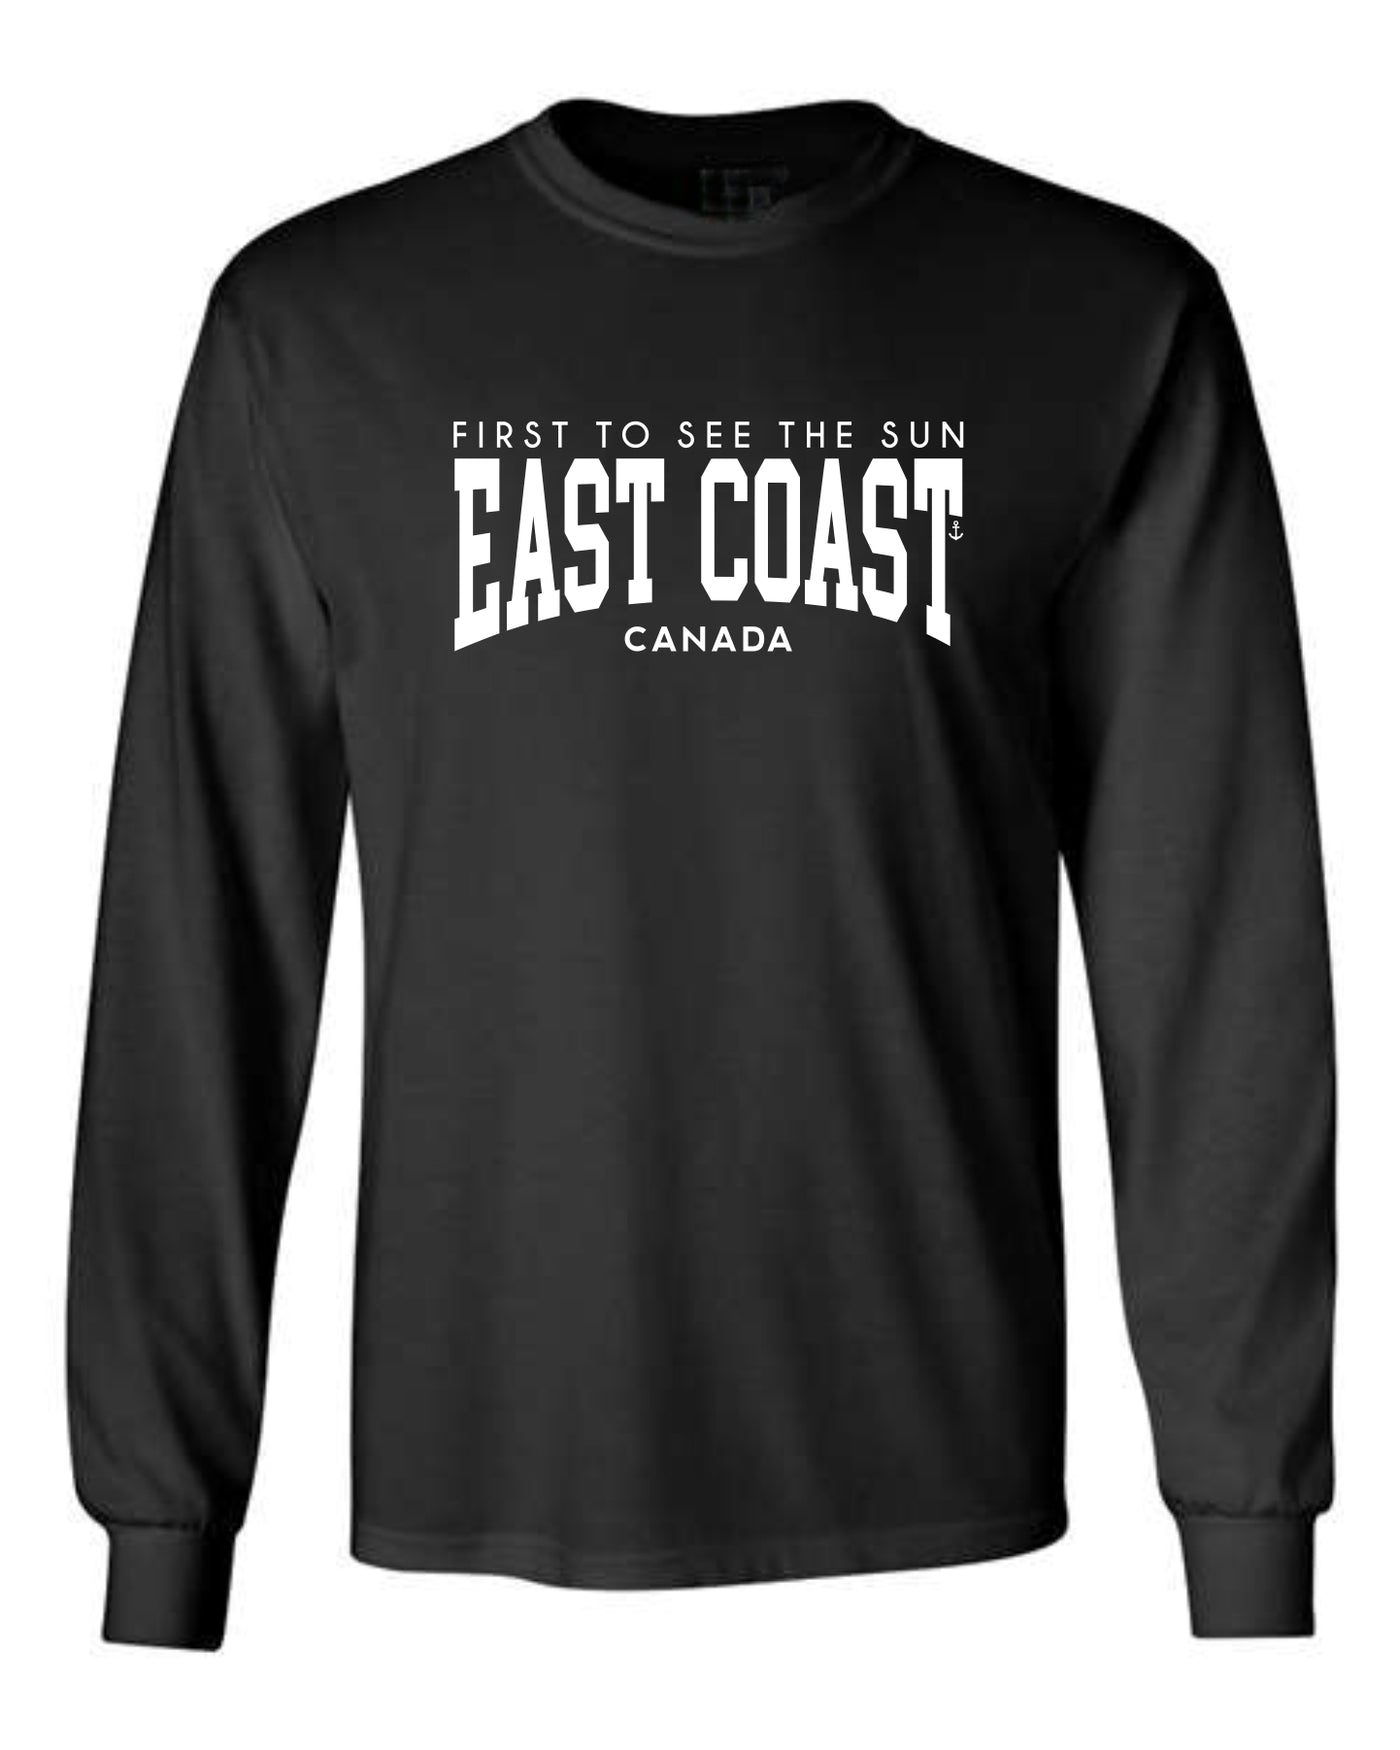 "East Coast - First To See The Sun" Unisex Long Sleeve Shirt